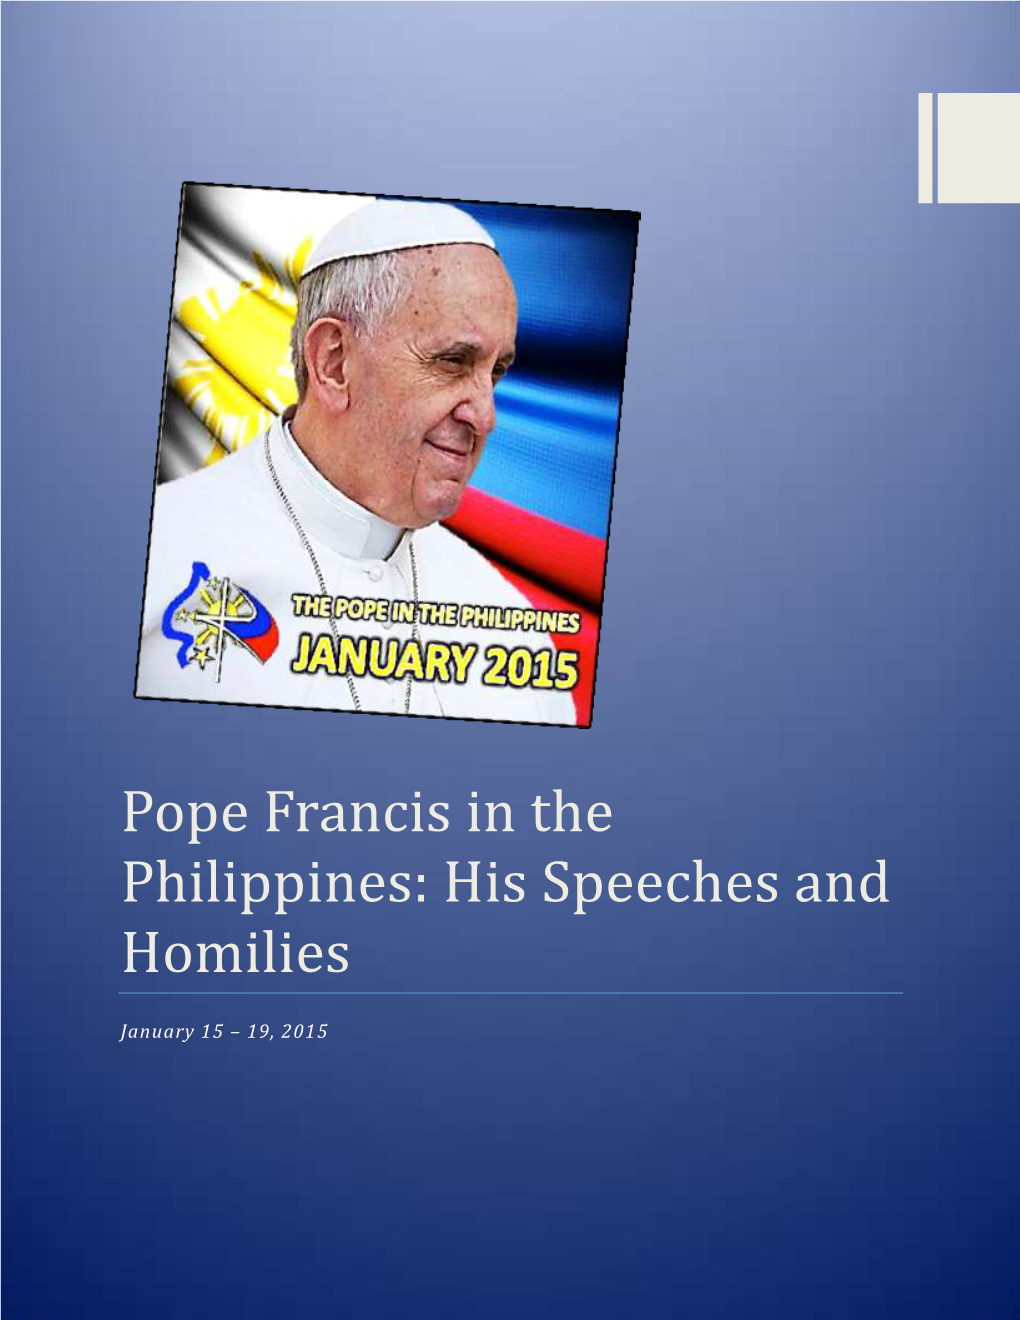 Pope Francis in the Philippines: His Speeches and Homilies